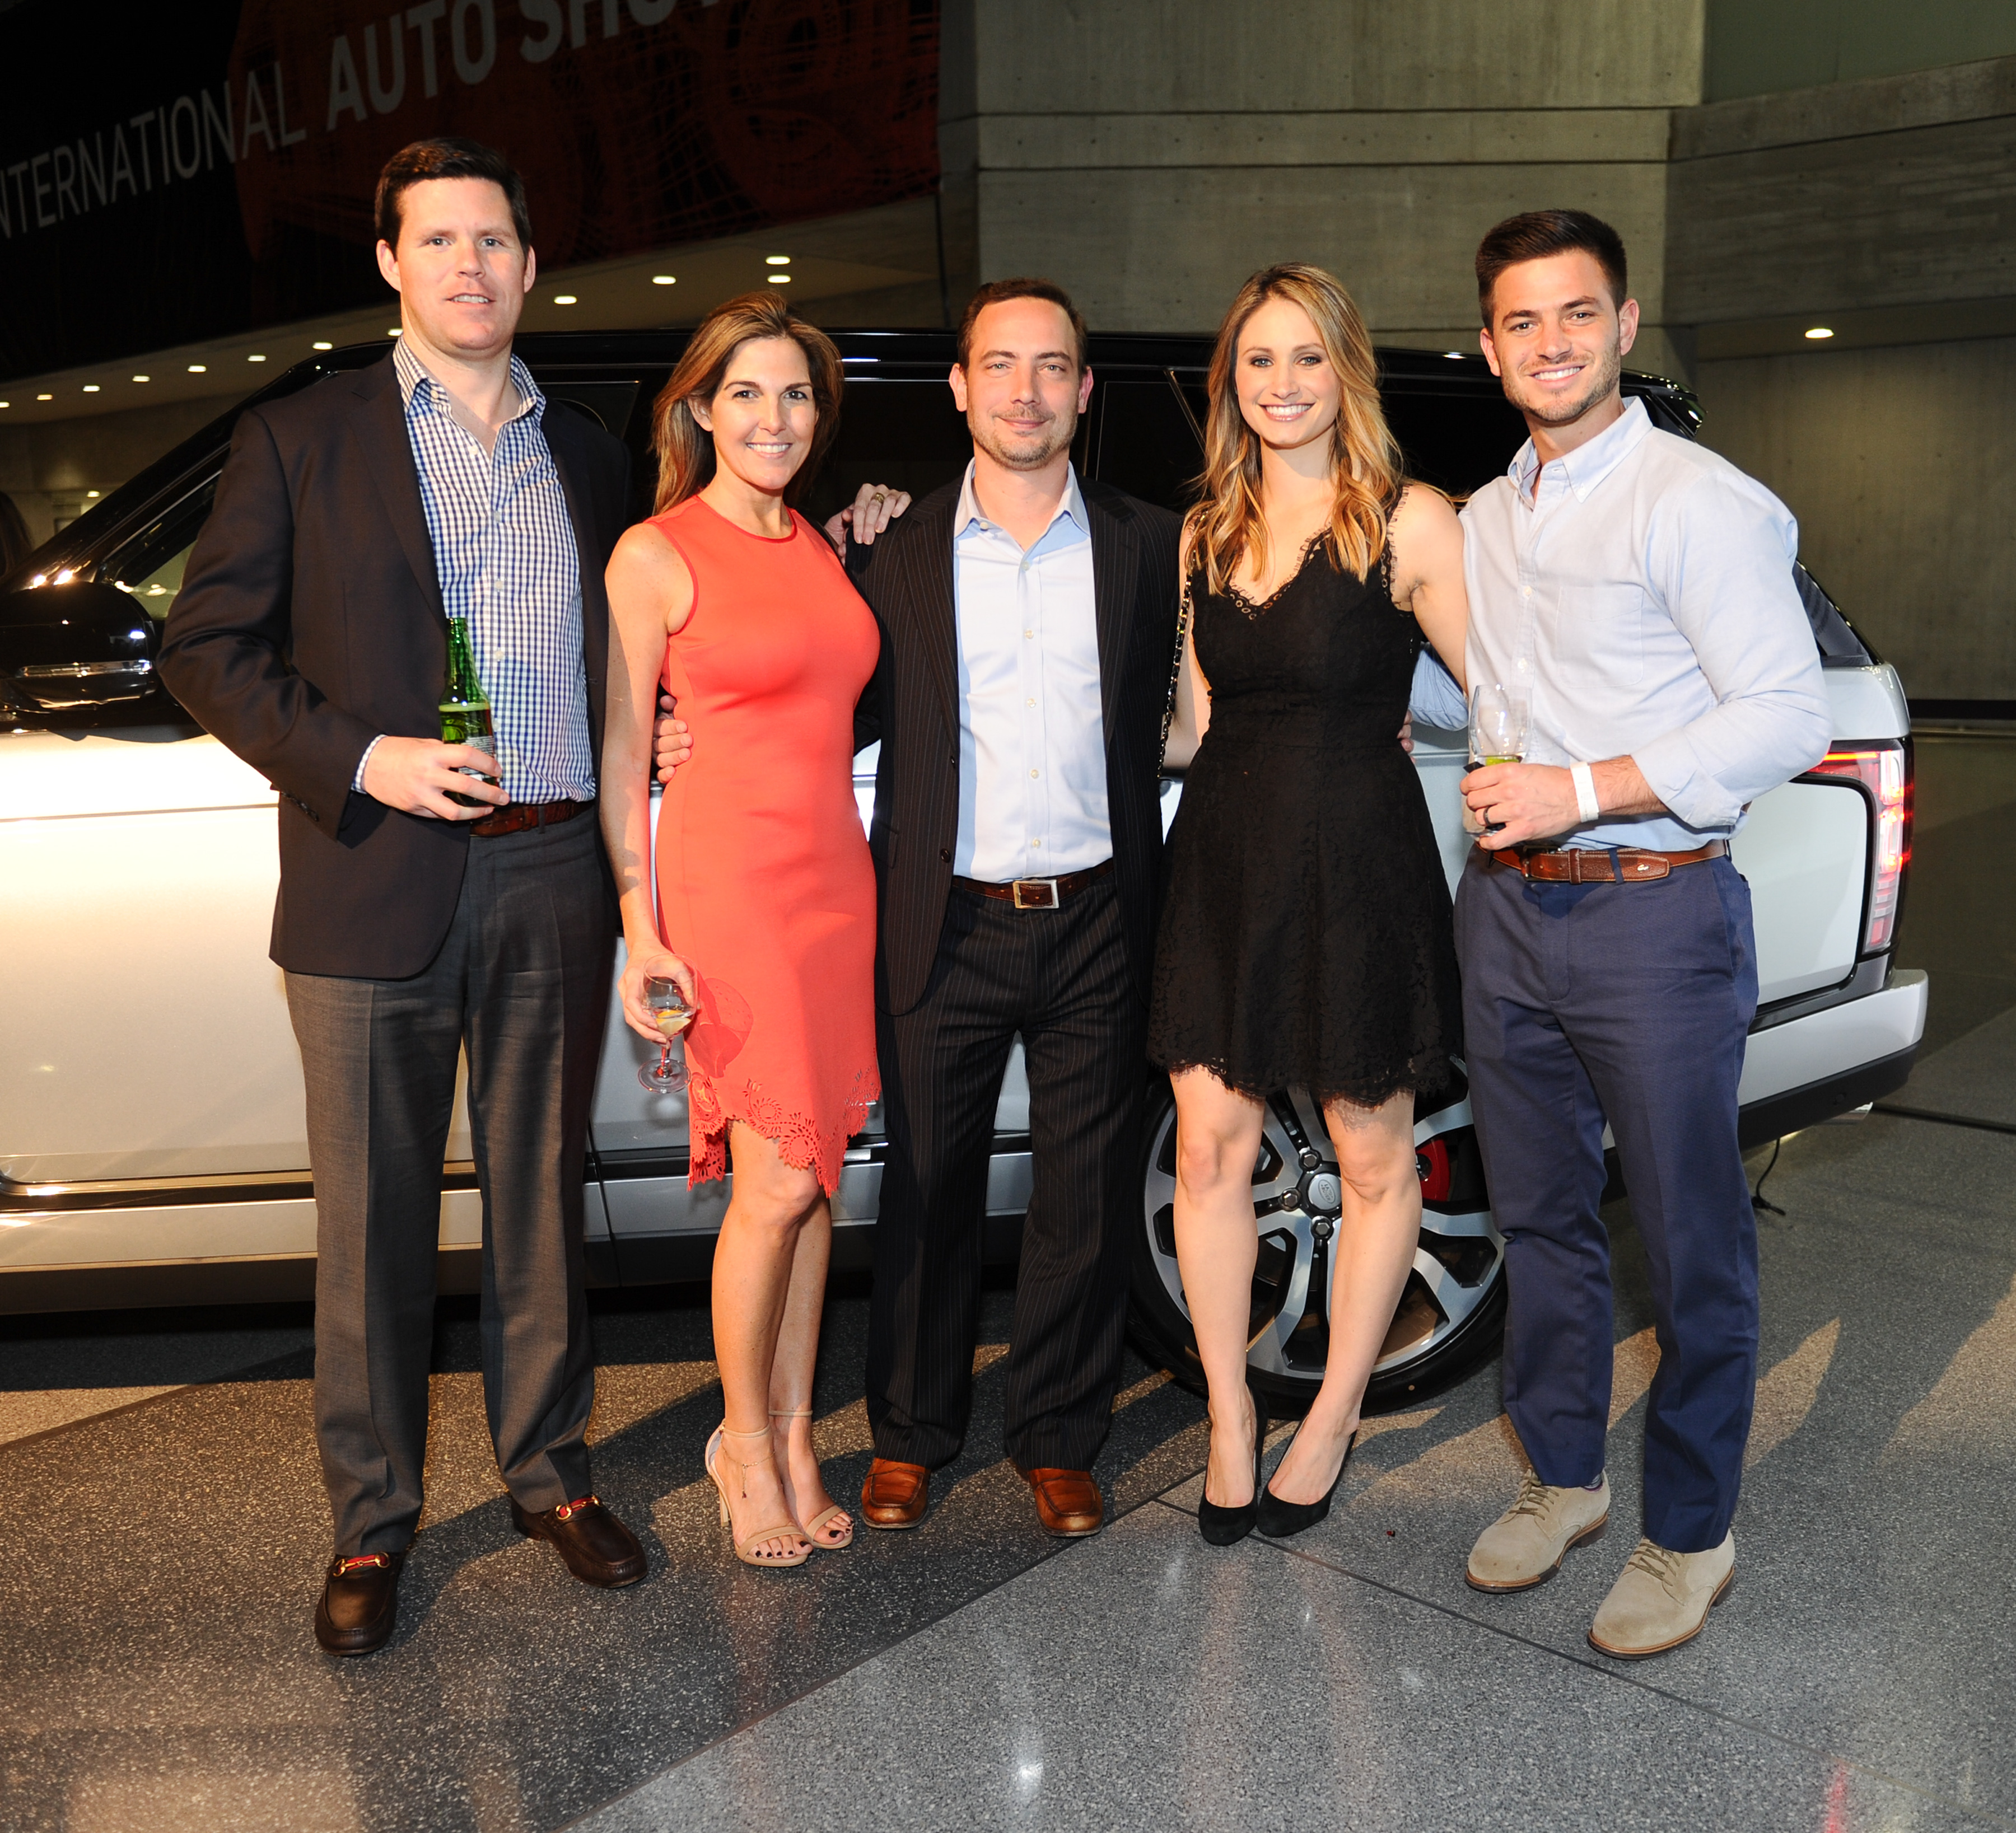 East Side House Settlement Hosts : the 18th Annual Gala Preview of the 2017 New York International Auto Show